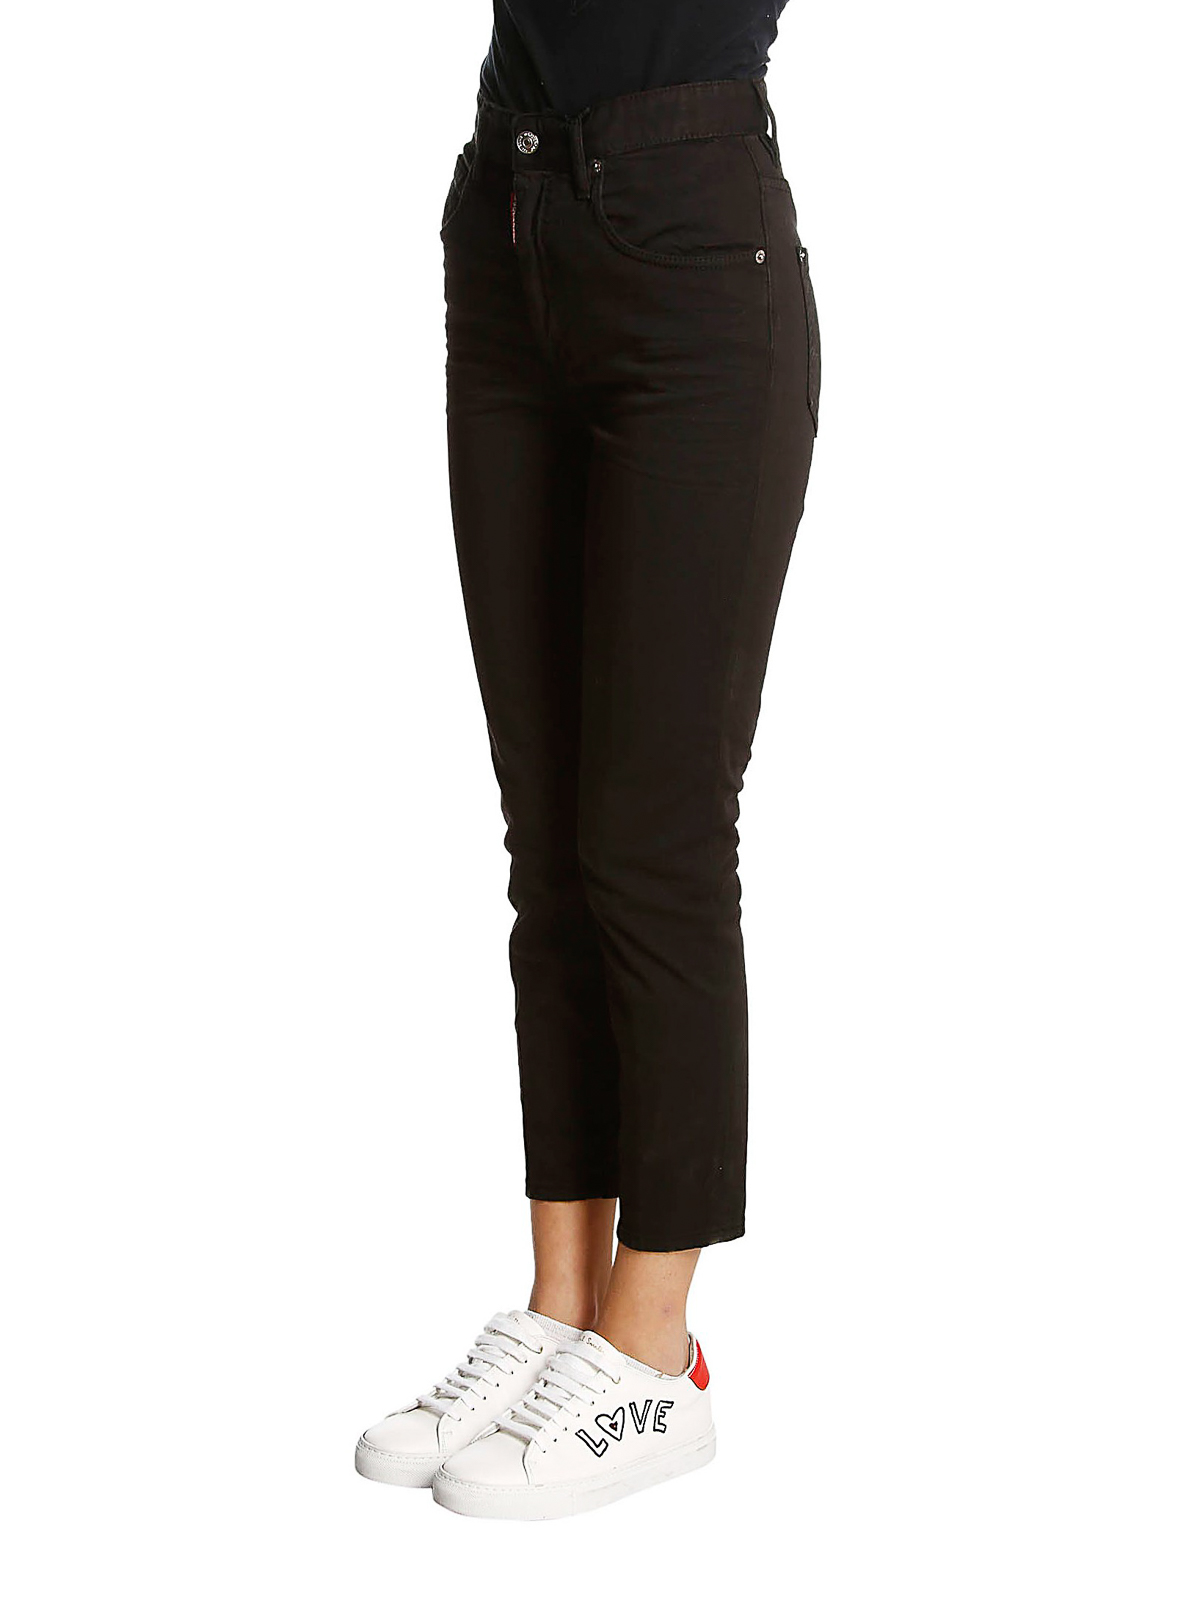 Skinny jeans Dsquared2 - Black high rise crop Twiggy jeans